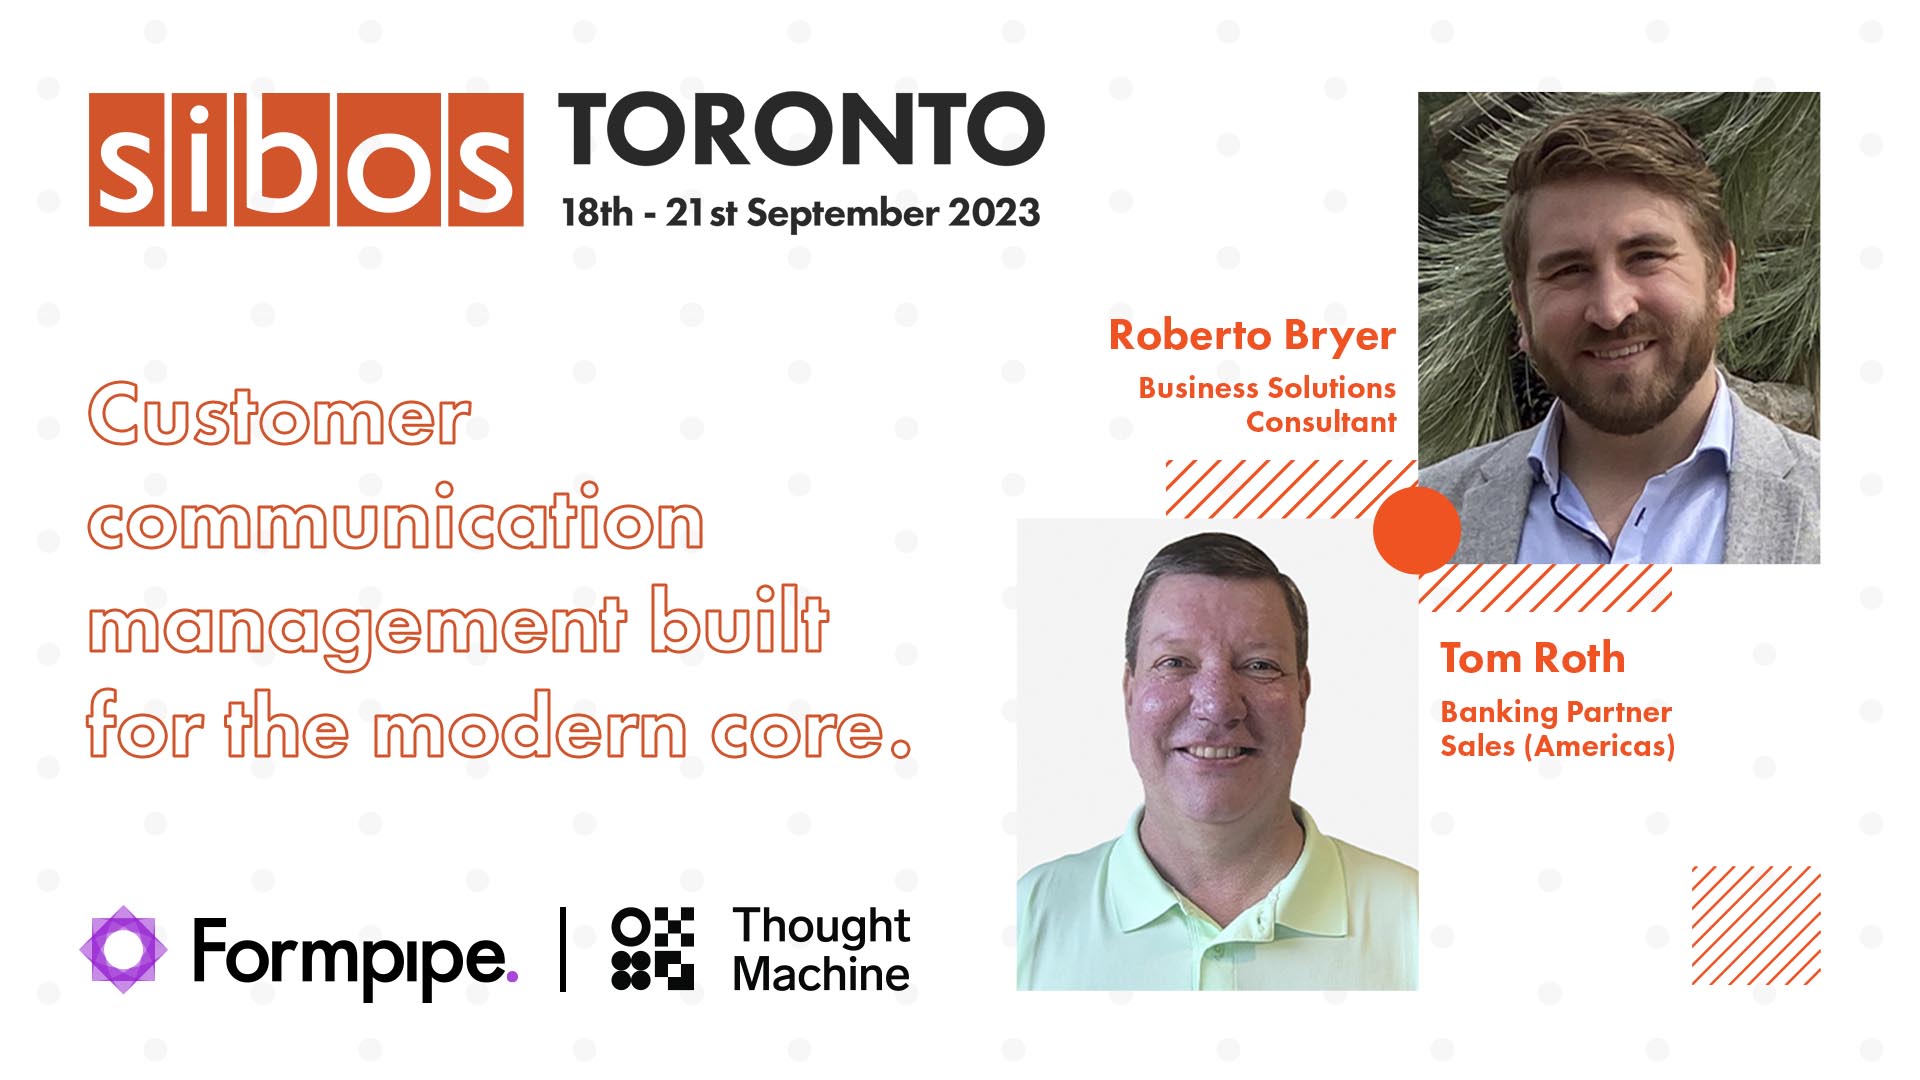 Tom Roth and Roberto Bryer attending Sibos 2023 in Toronto.